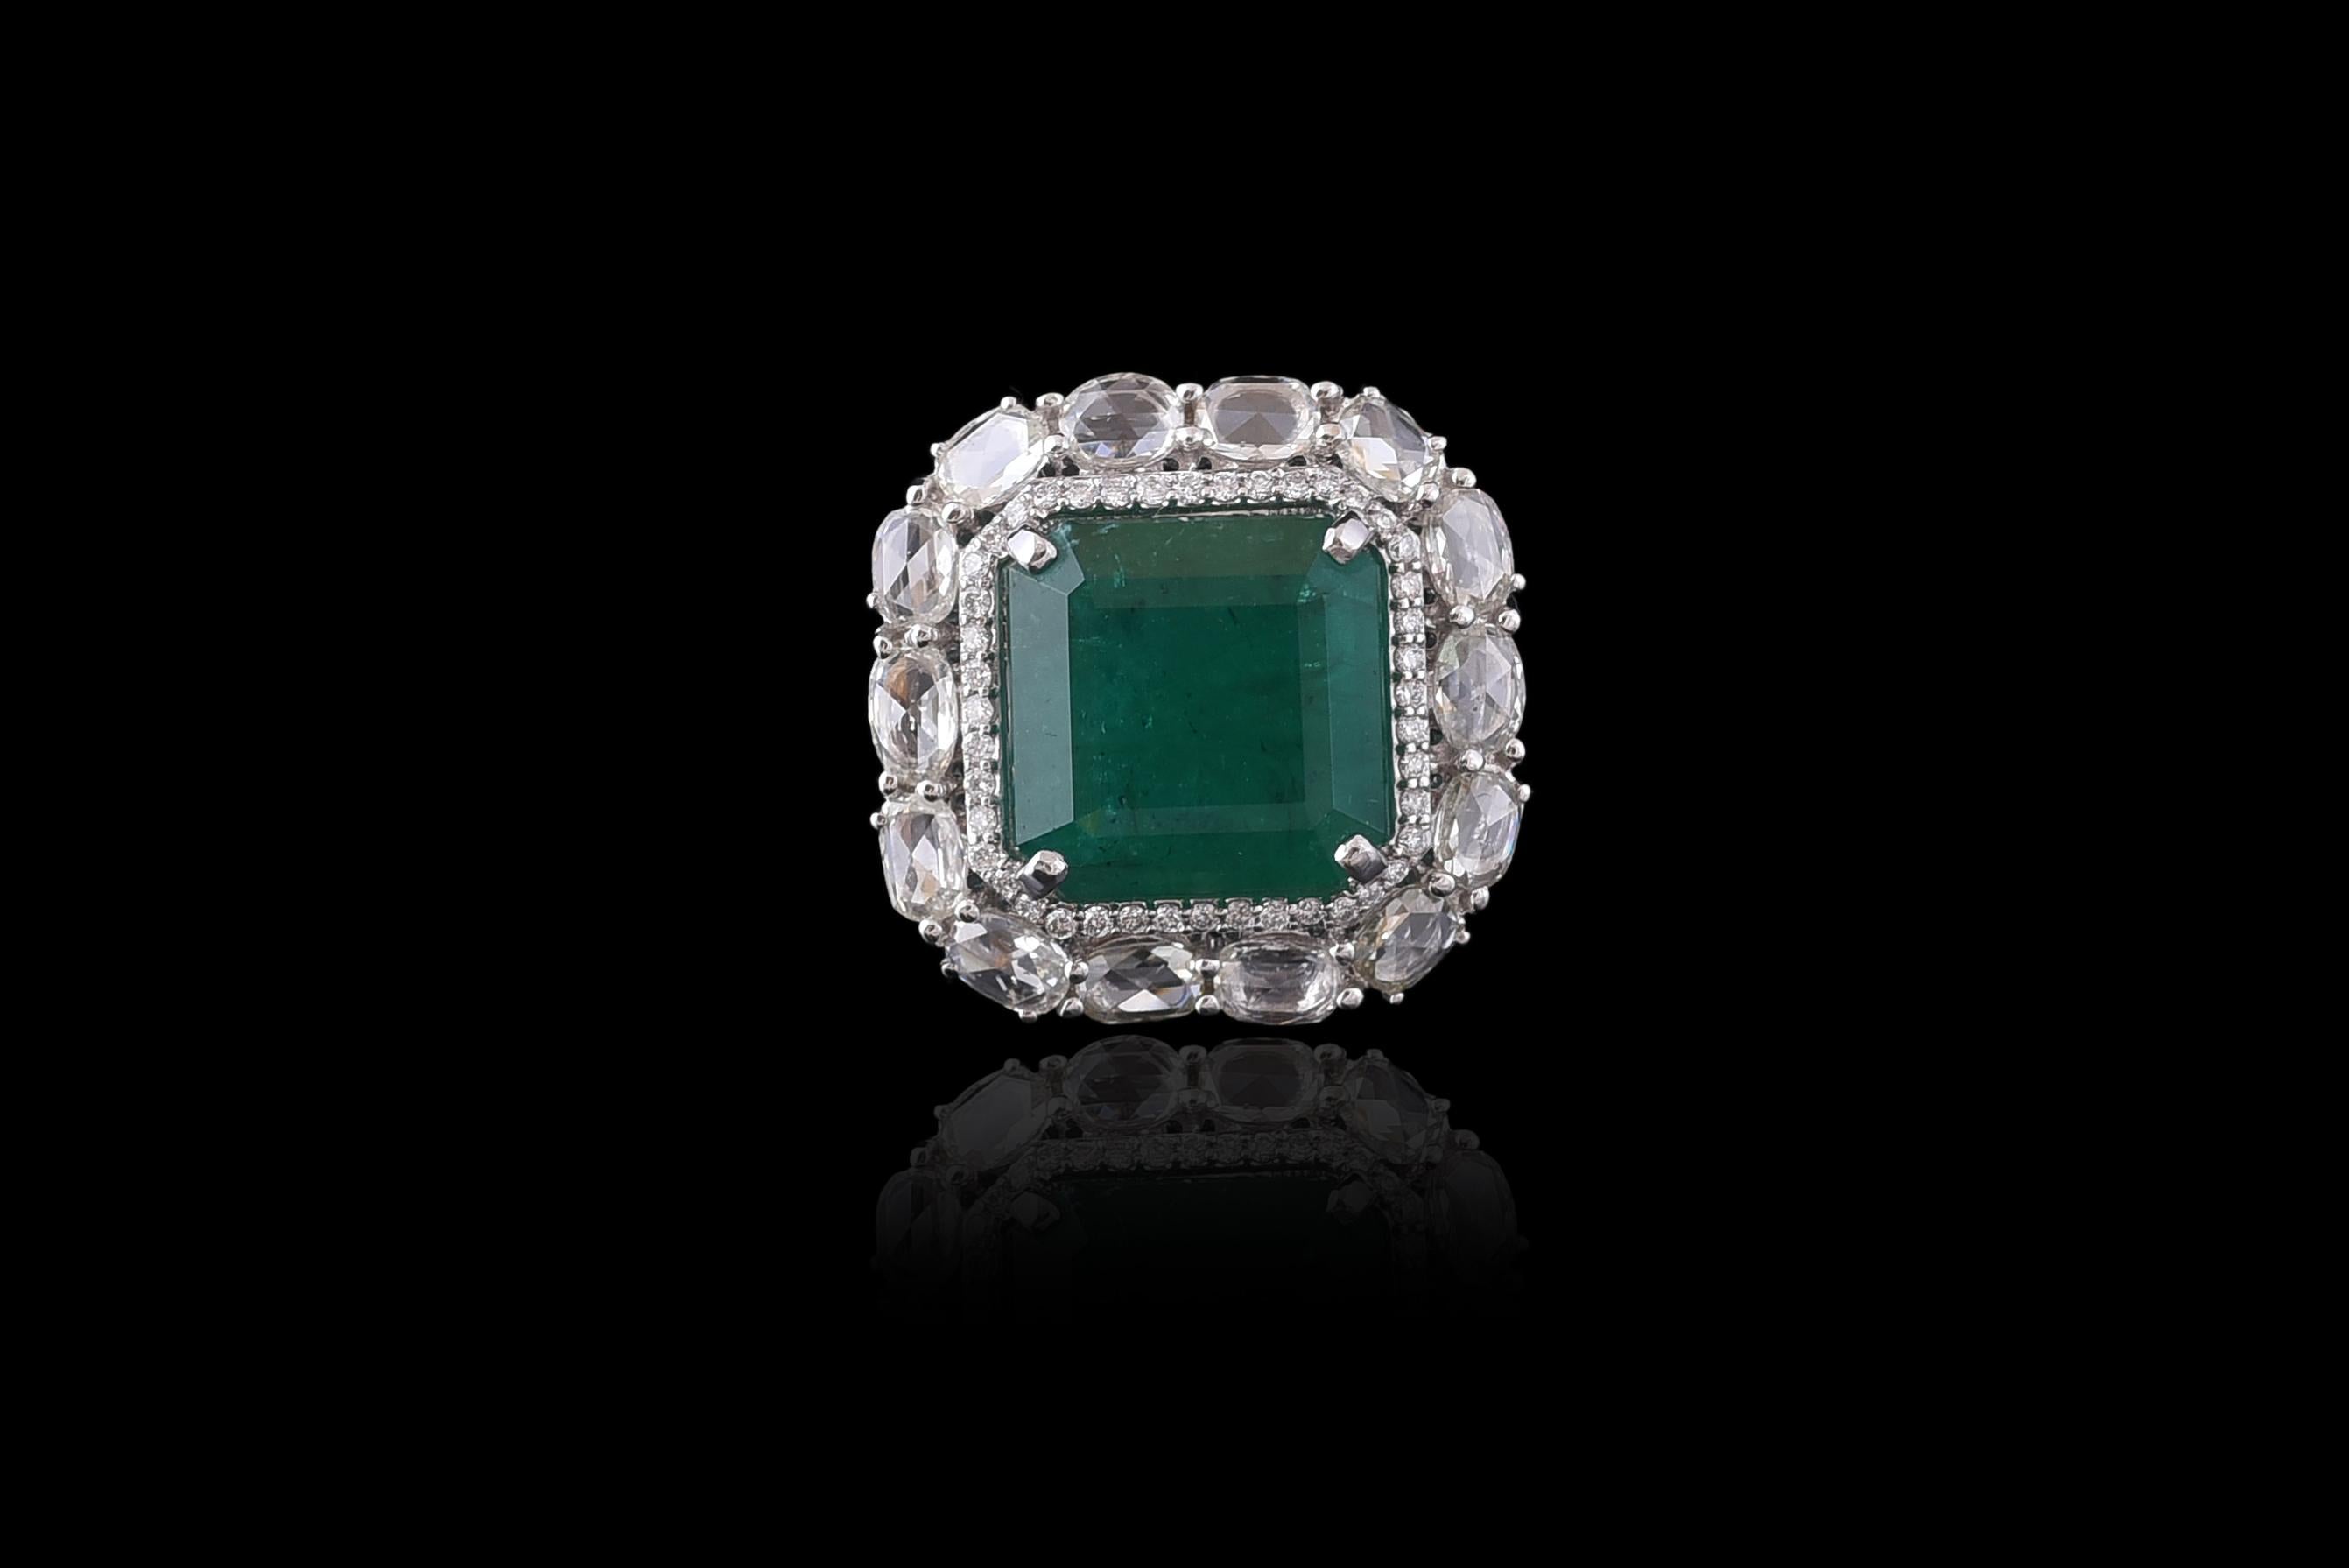 A classic Zambian Emerald and Rose Cut Diamond Cocktail Ring set in 18K white gold. The weight of the Emerald is 11.54 carats. The weight of the Rose cut diamonds is 3.08 carats. The Emerald is natural, and without any treatment and originates from